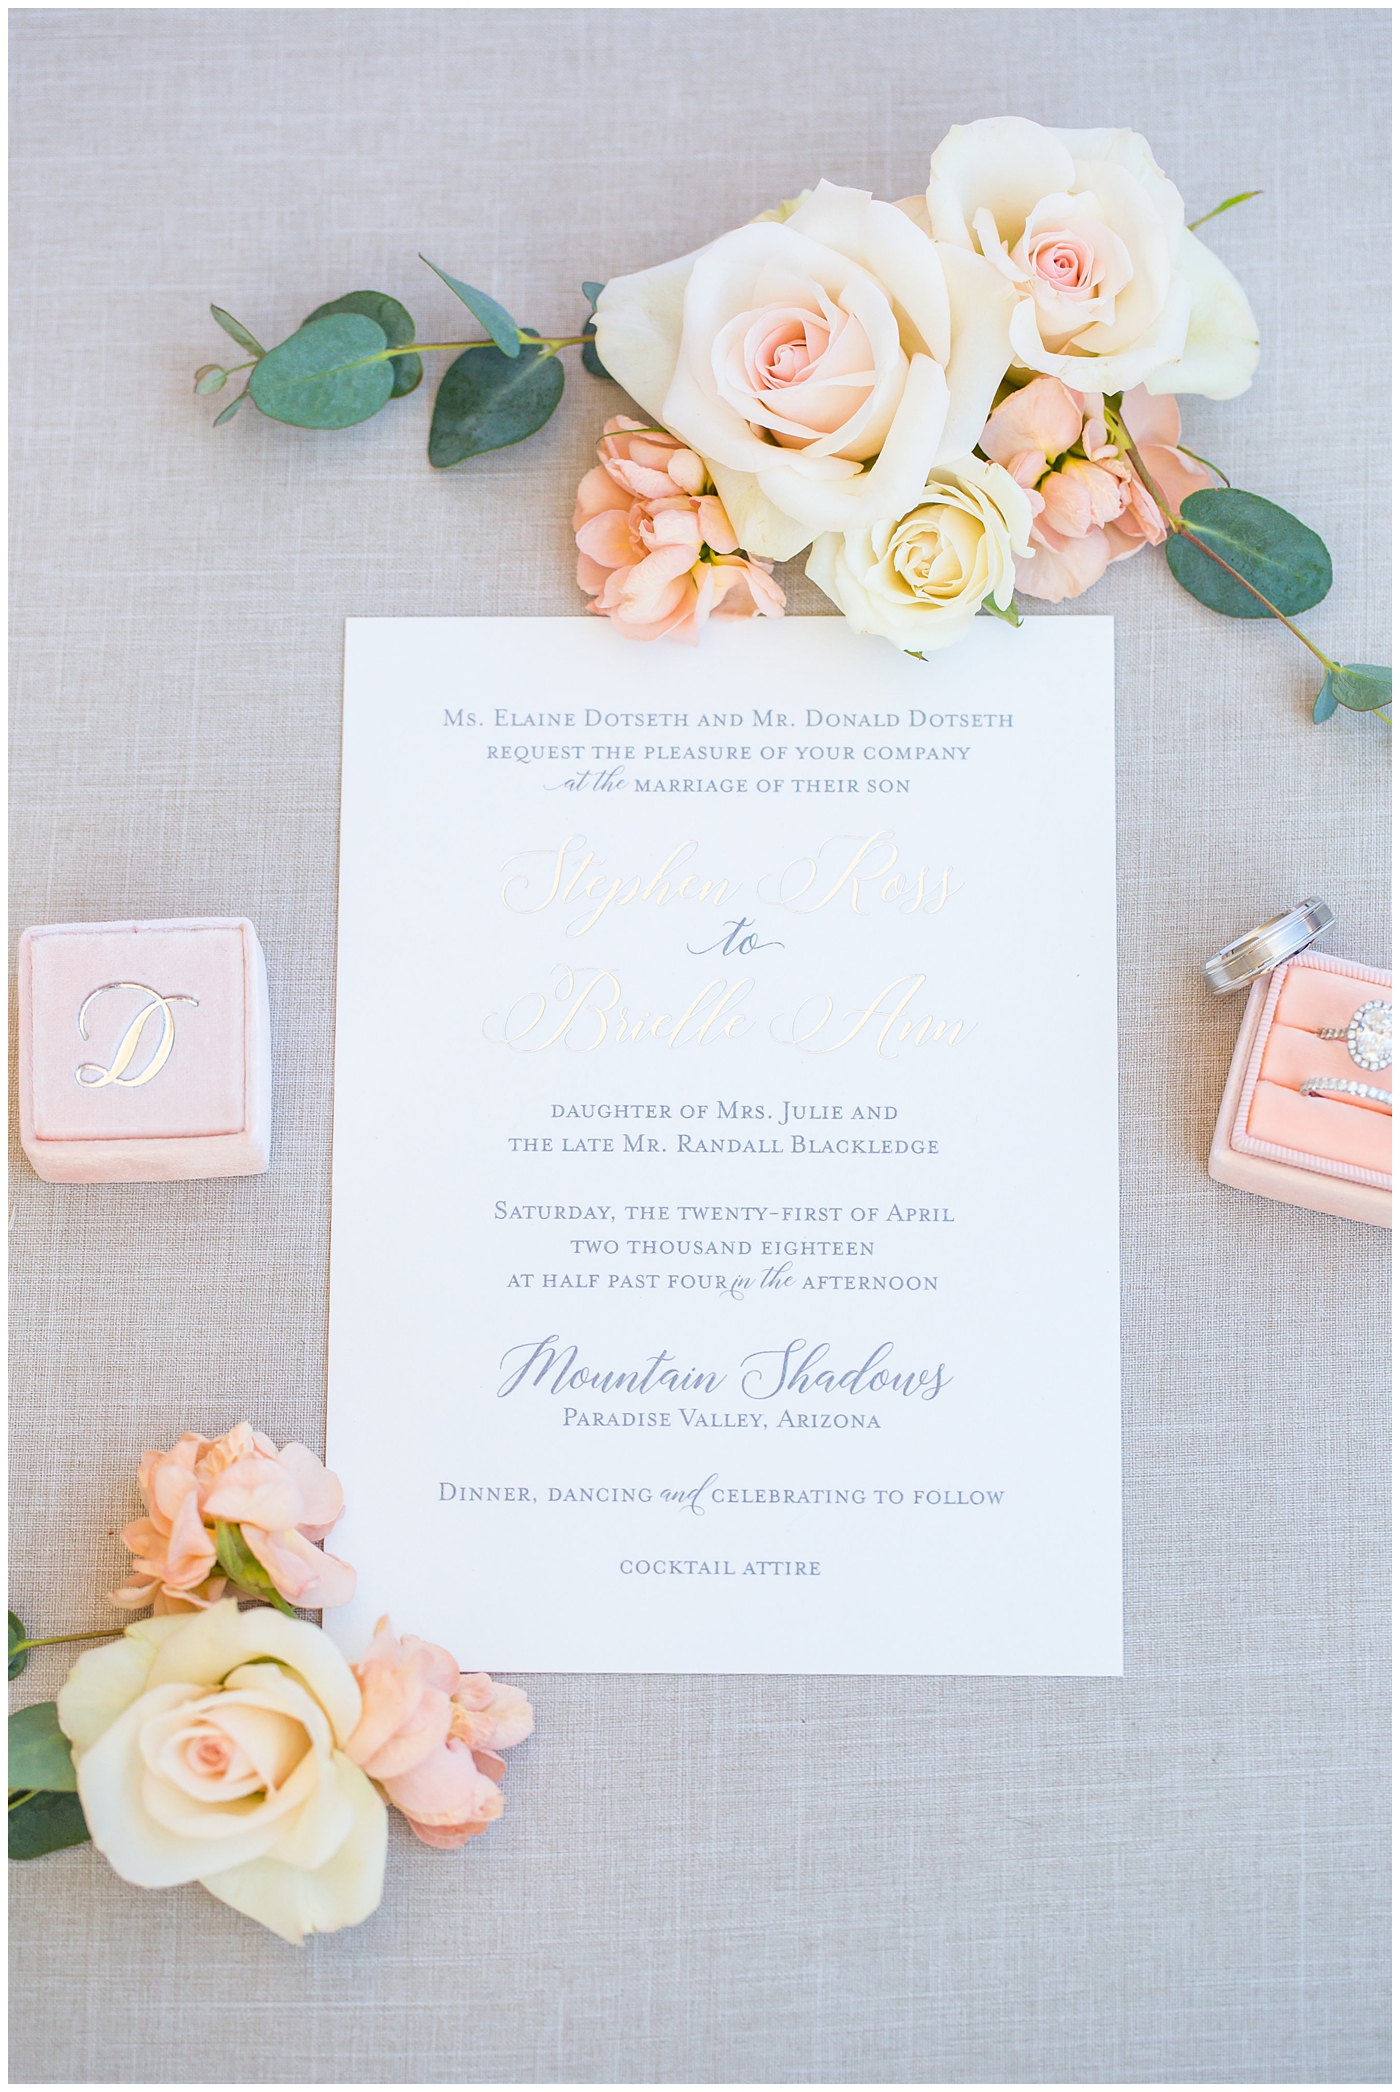 blush pink invitation with soft green watercolor suite detail flat lay with ribbon and rings wedding details